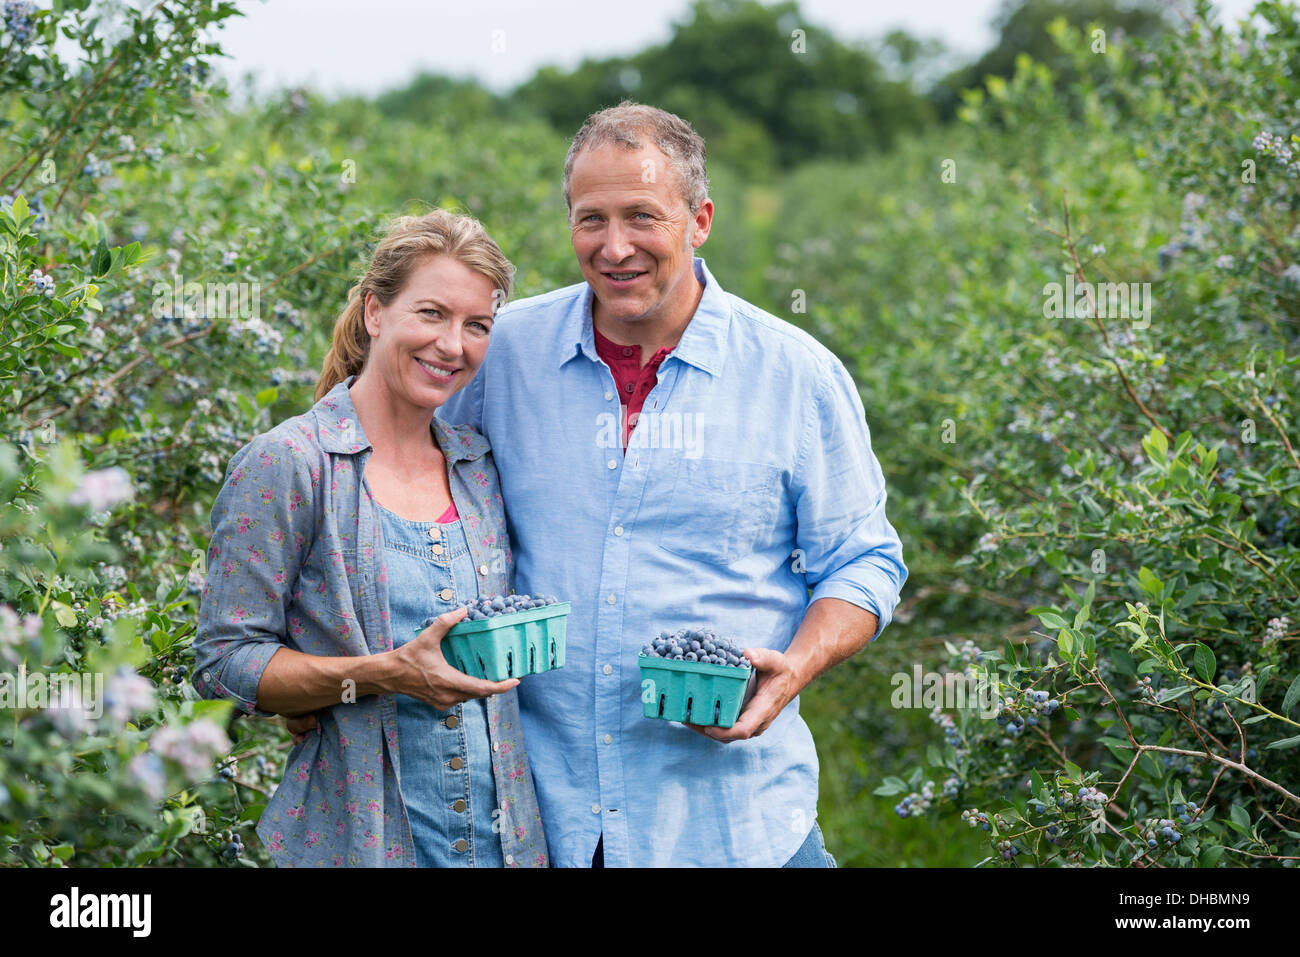 An organic fruit farm. A mature couple picking the berry fruits from the bushes. Stock Photo